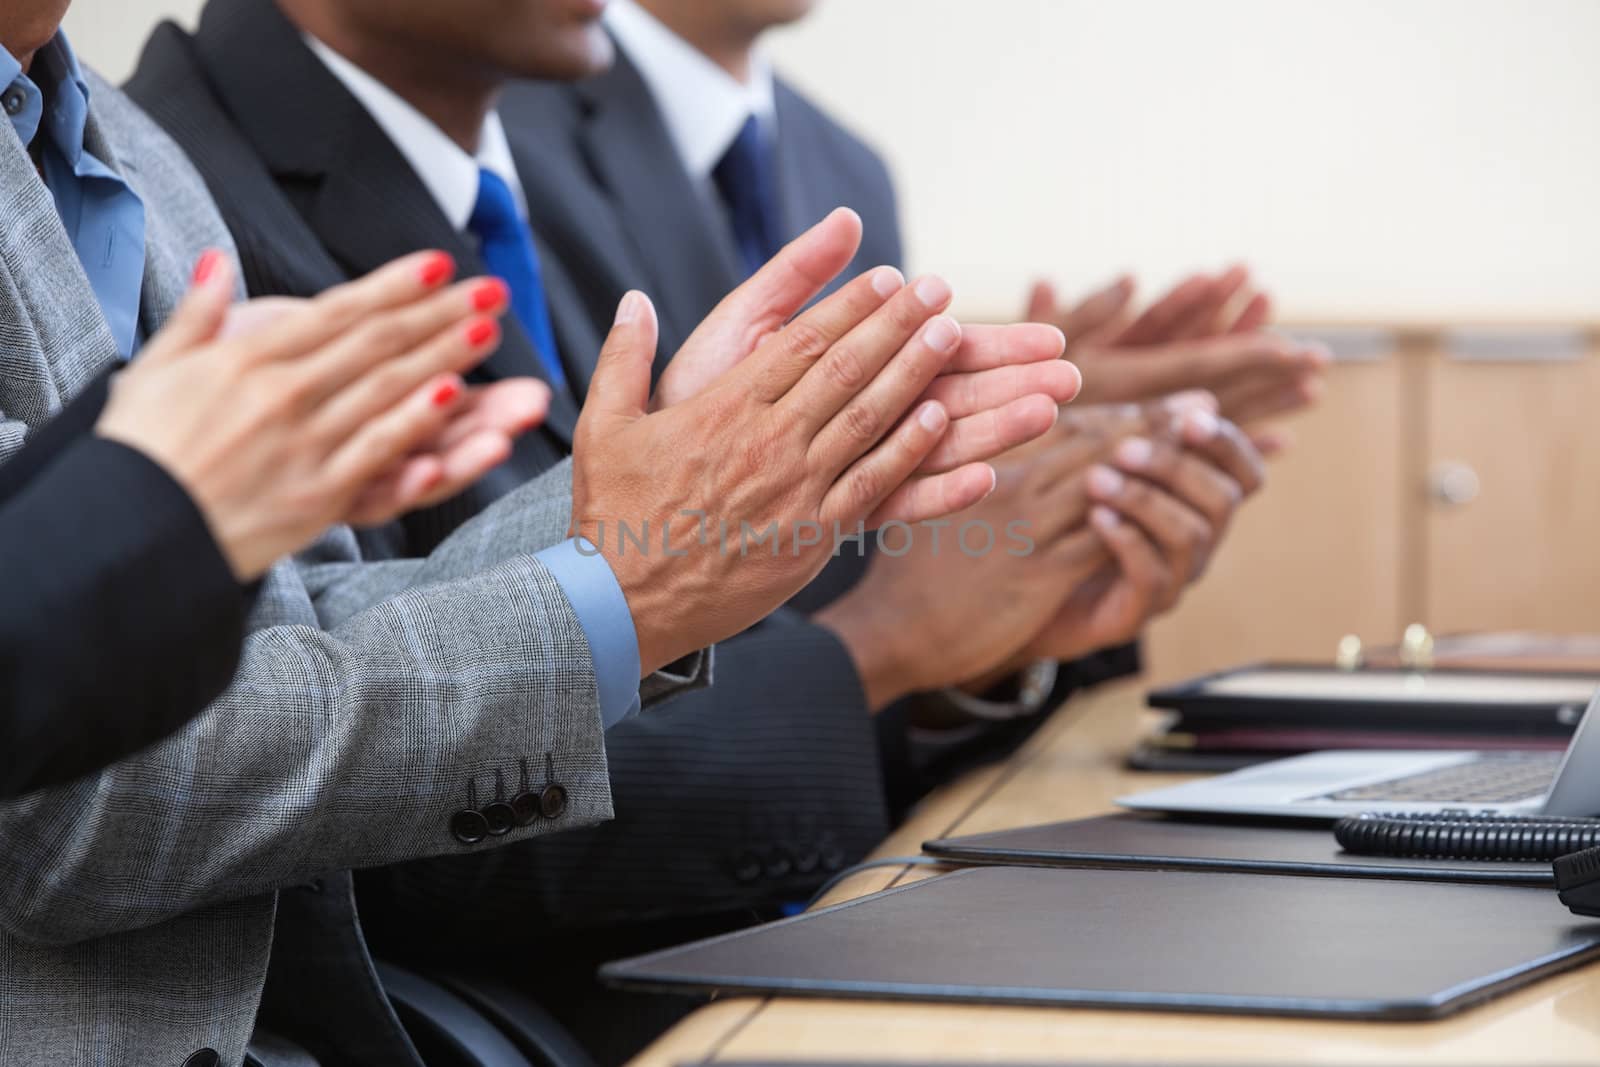 Cropped image of businesspeople clapping